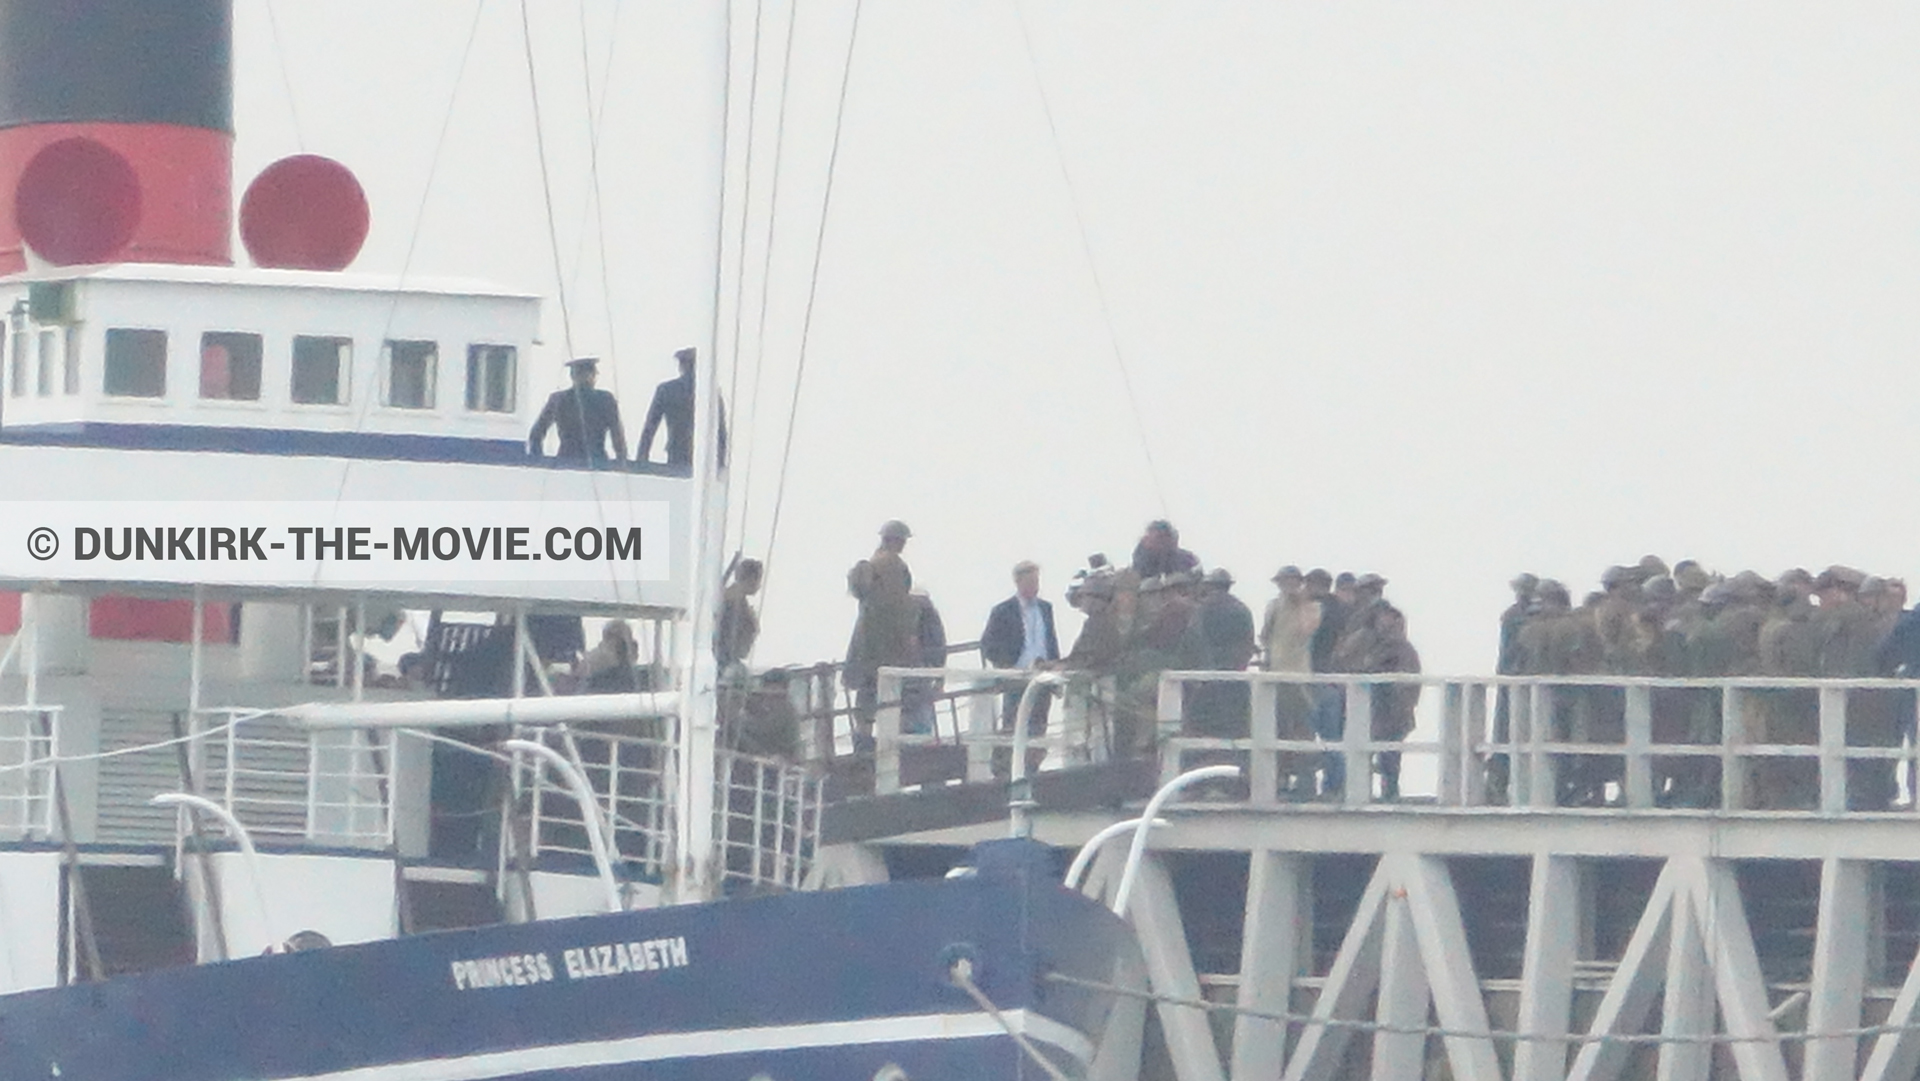 Picture with EST pier, Christopher Nolan, Princess Elizabeth,  from behind the scene of the Dunkirk movie by Nolan